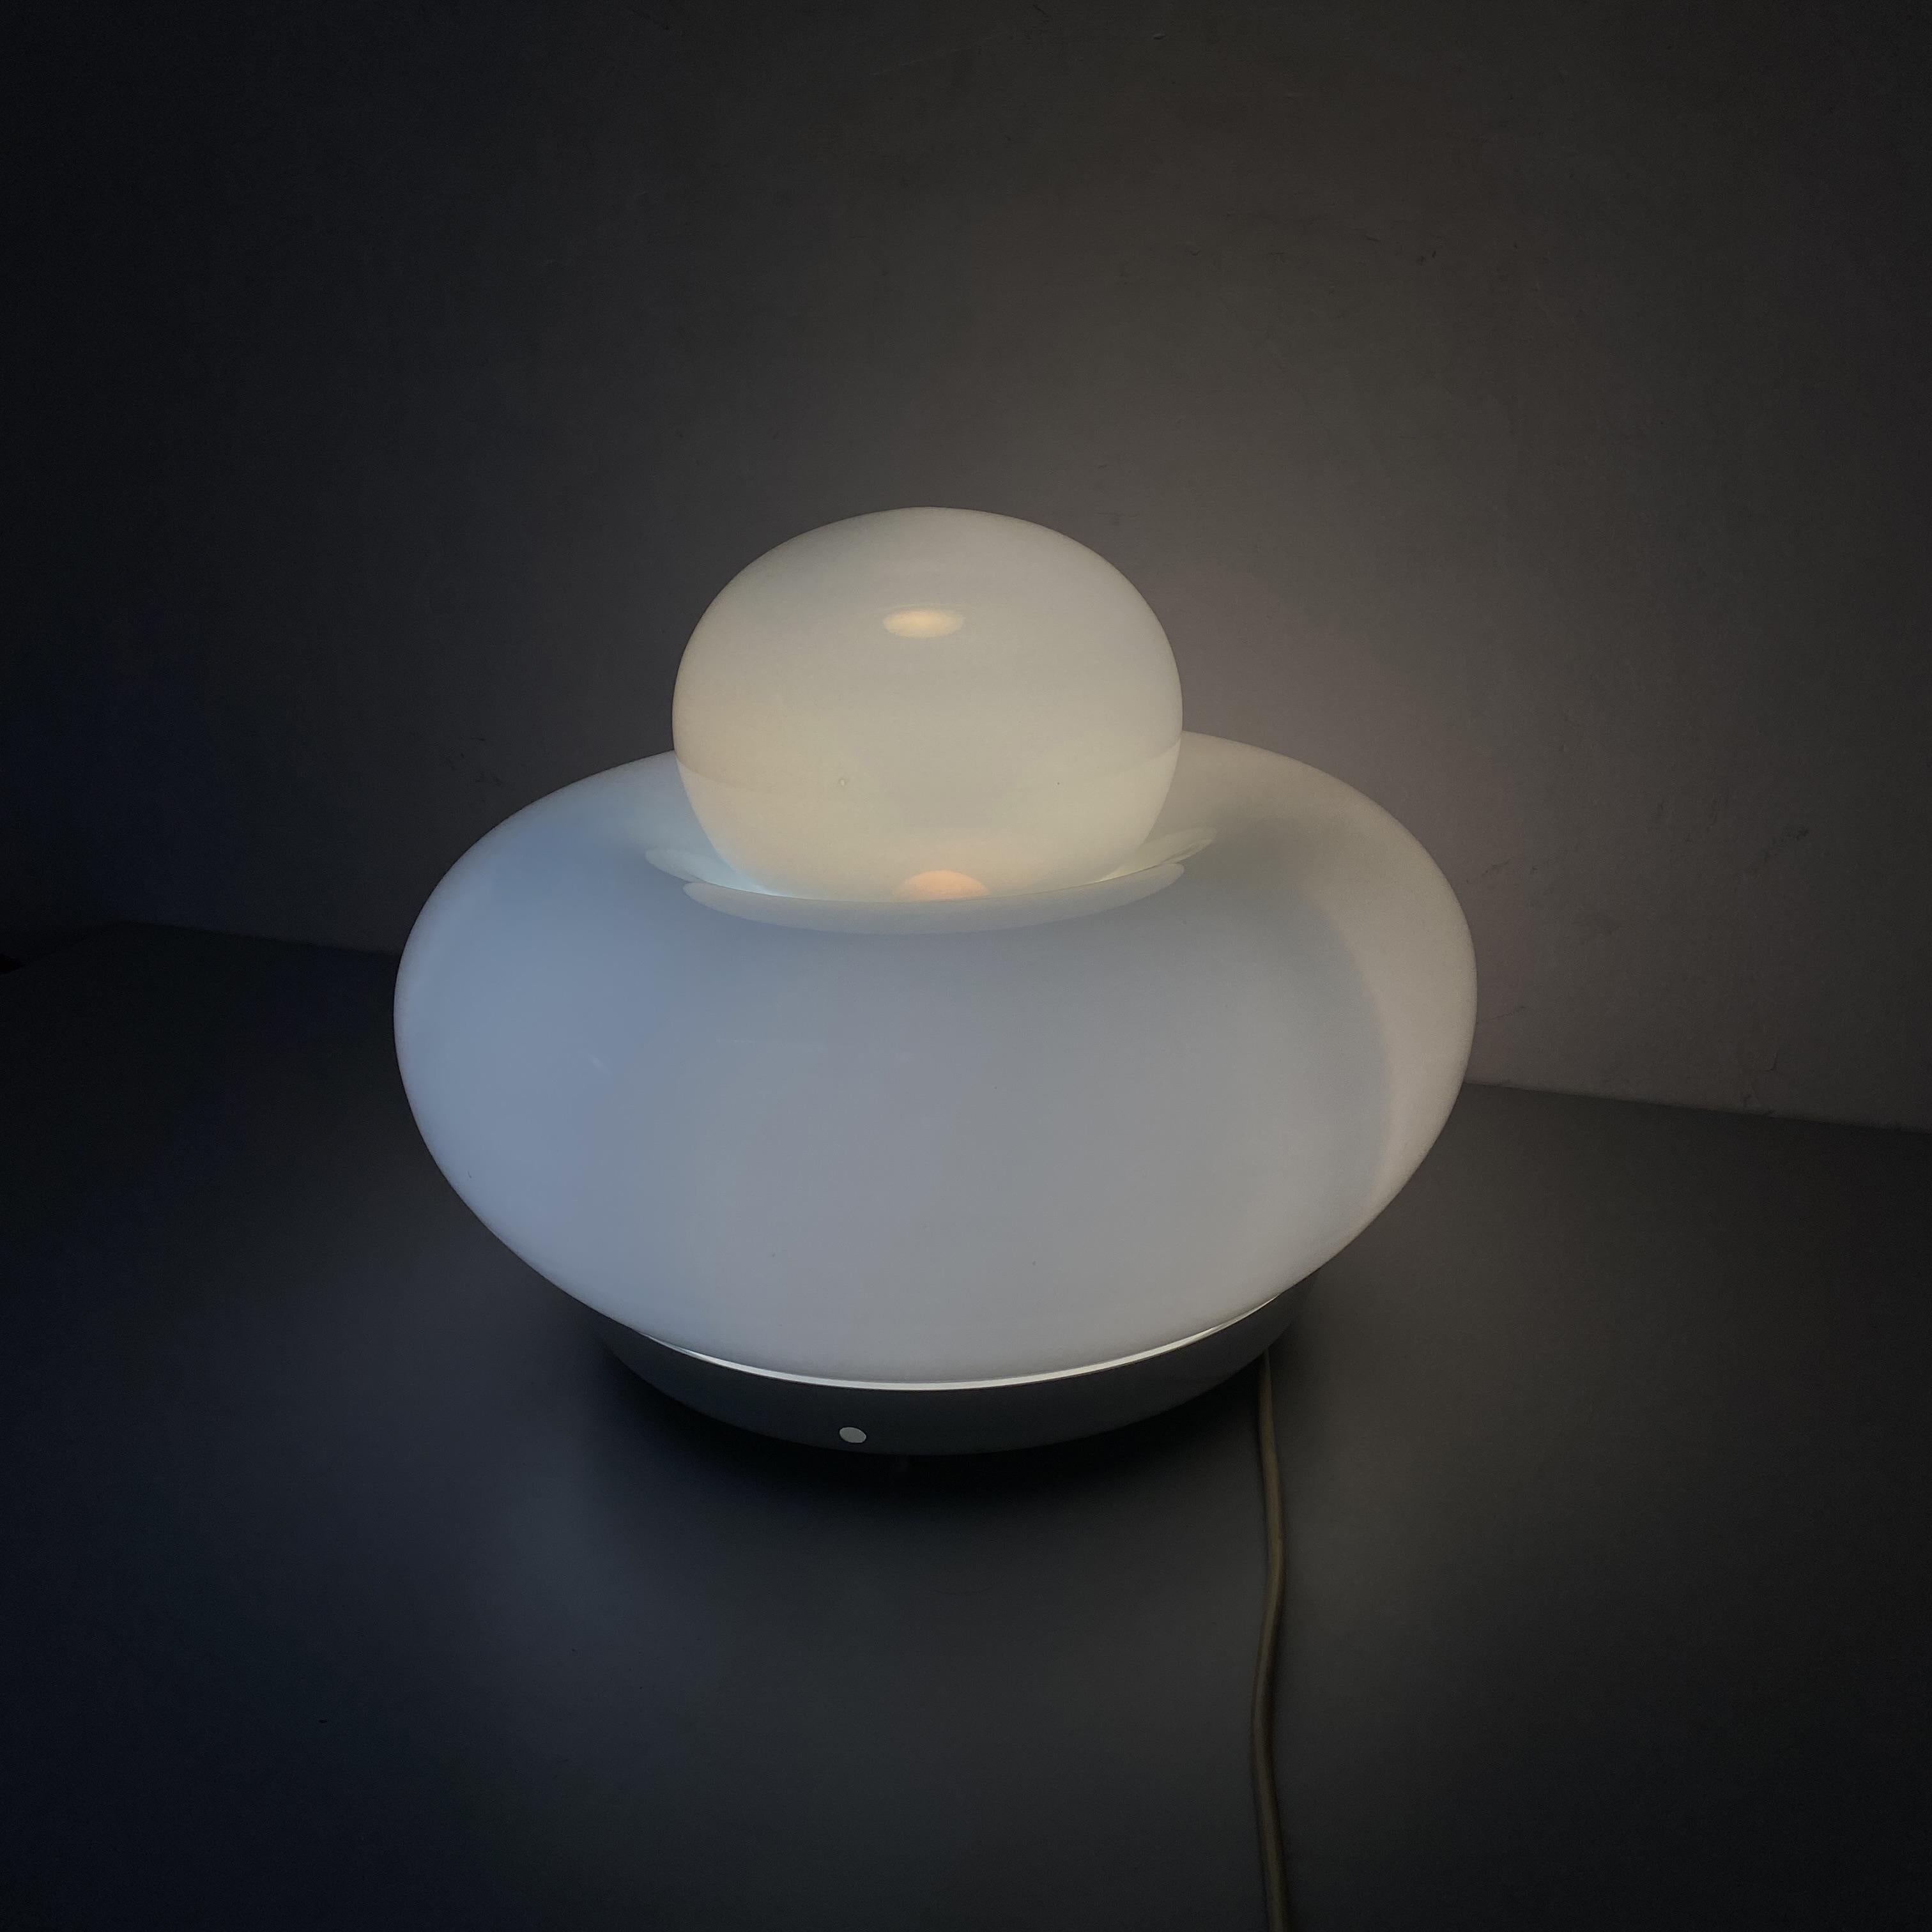 Italian Modern Electra Table Lamp by Giuliana Gramigna for Artemide, 1968 For Sale 9